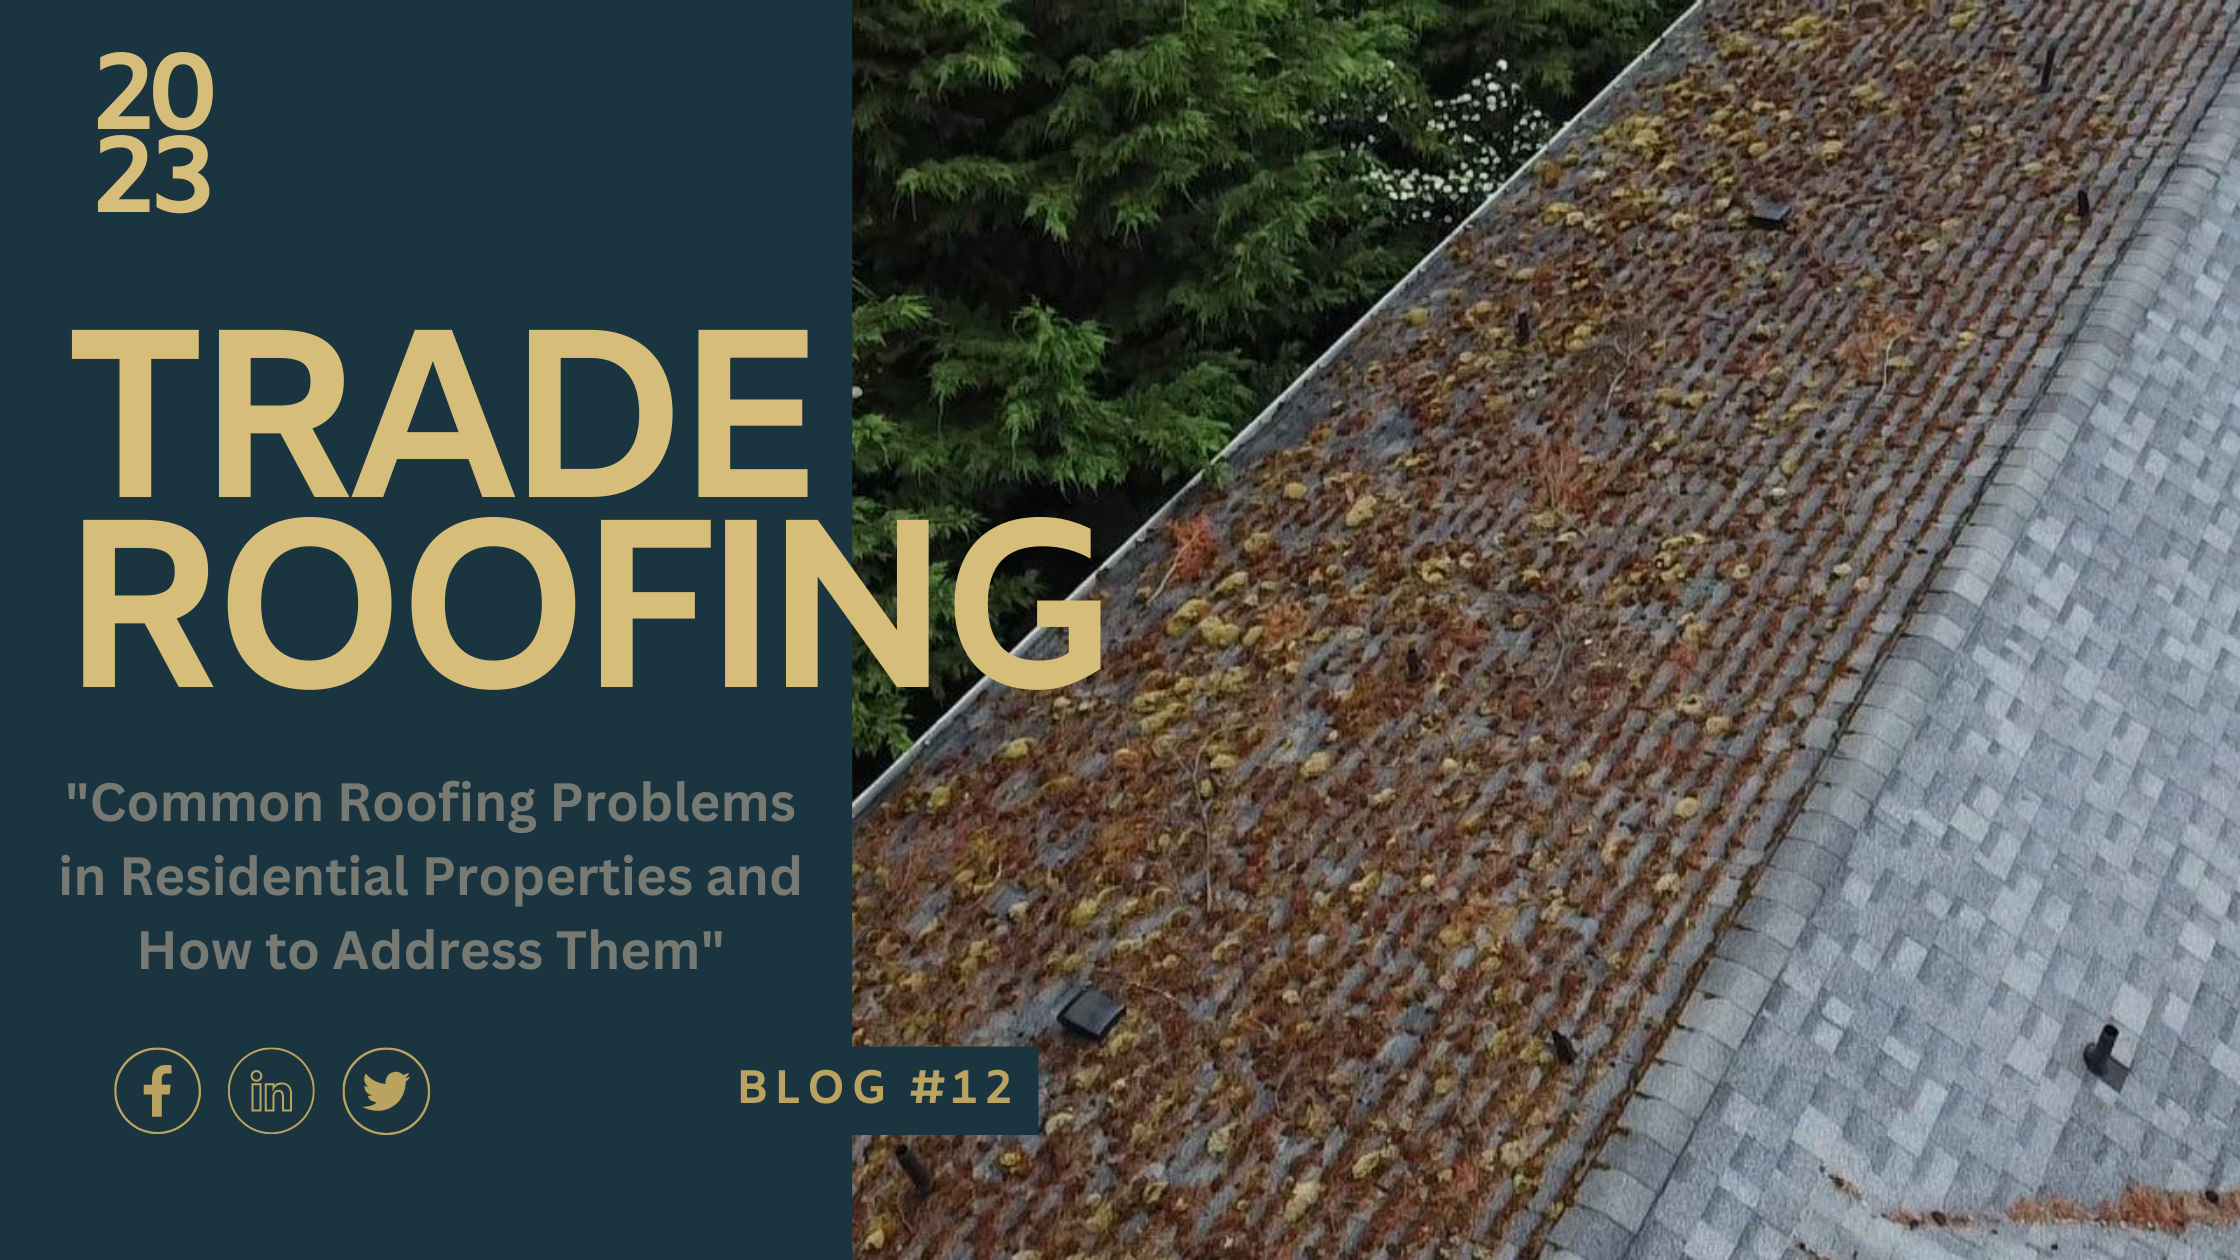 Common Roofing Problems in Residential Properties and How to Address Them